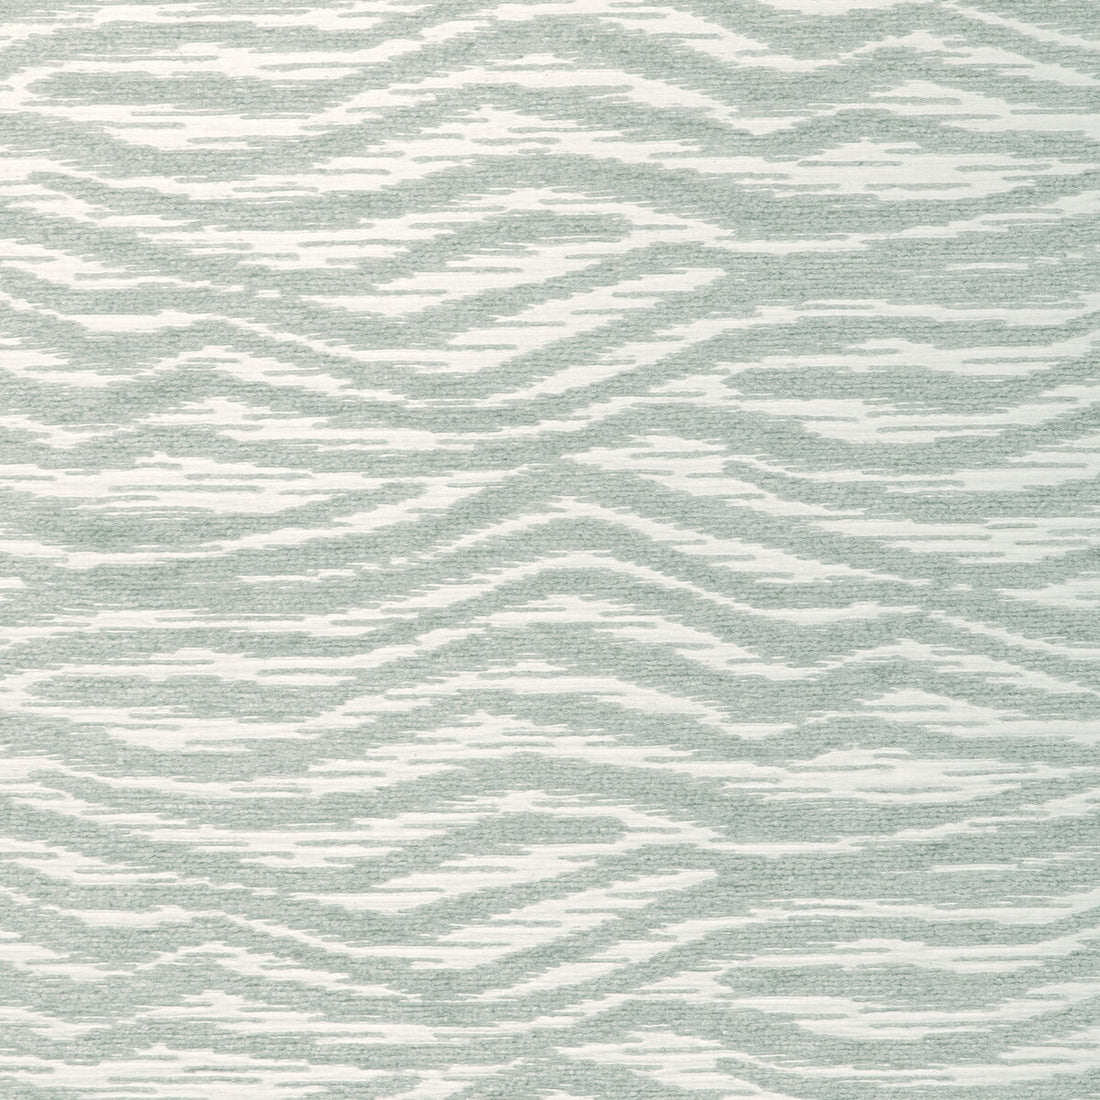 Tuscan Ripples fabric in sky color - pattern 36899.15.0 - by Kravet Couture in the Atelier Weaves collection